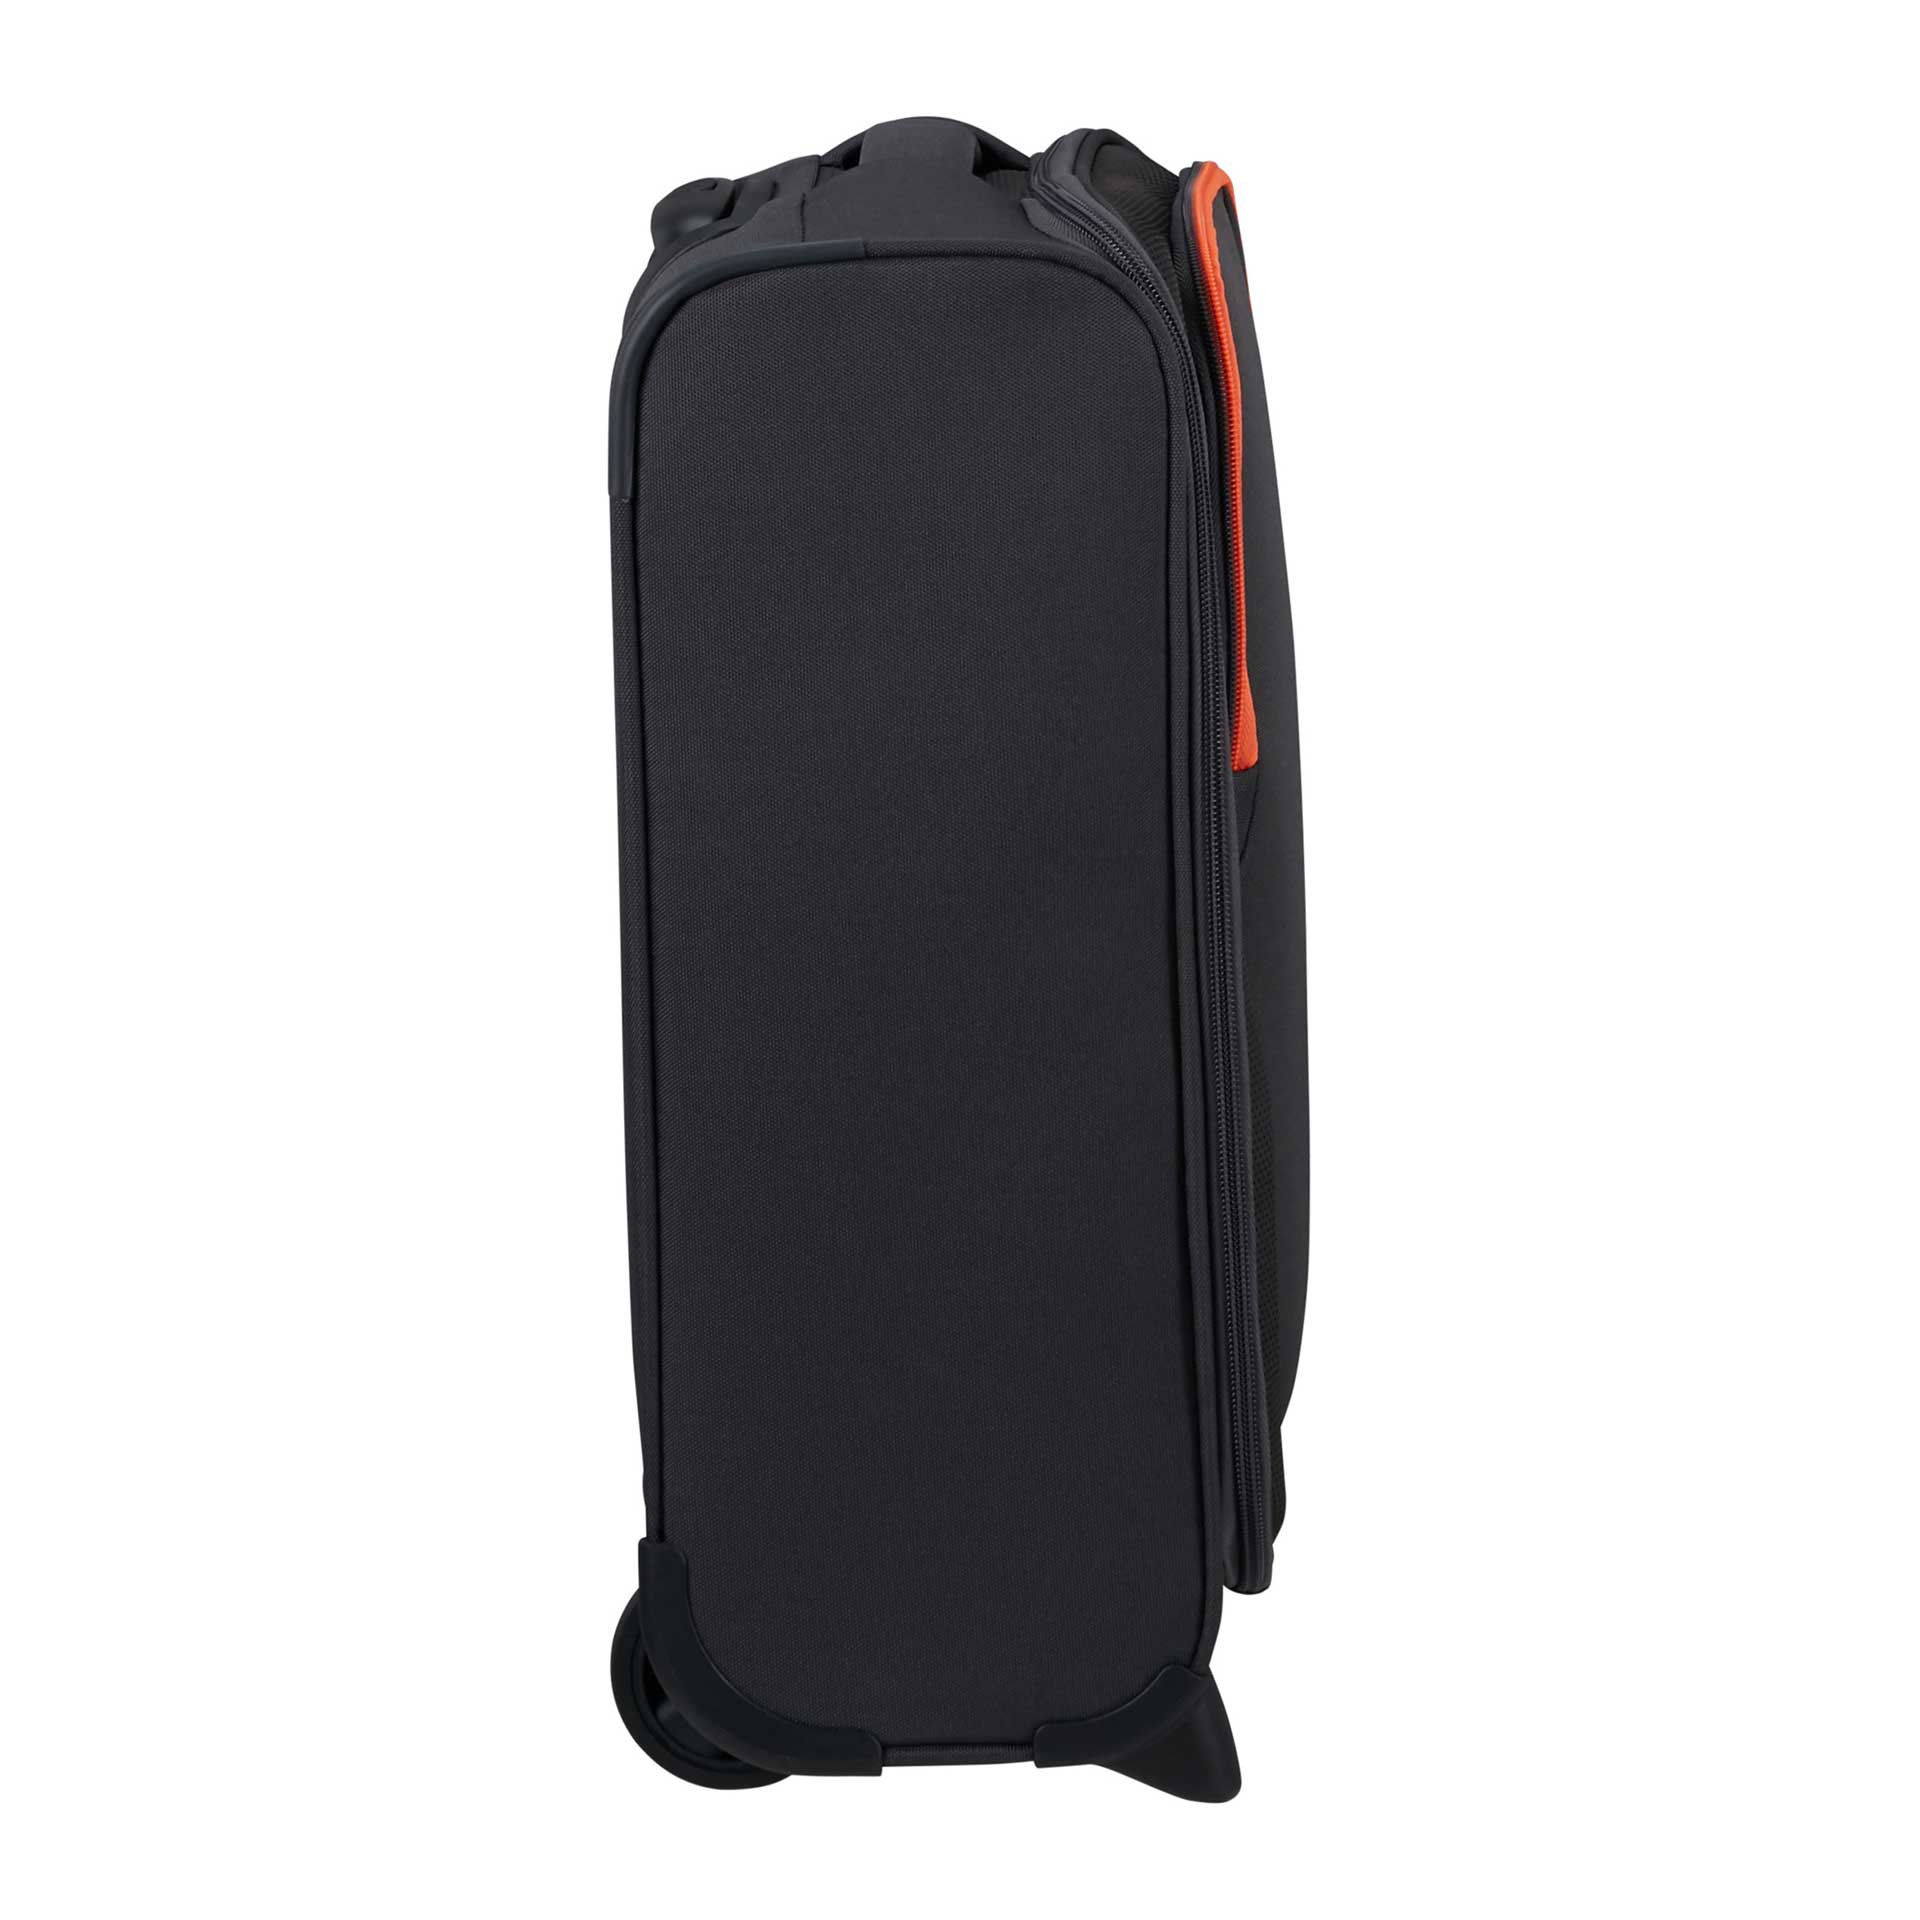 American Tourister Sea Seeker Upright 2-Rad Underseater 45 cm charcoal grey